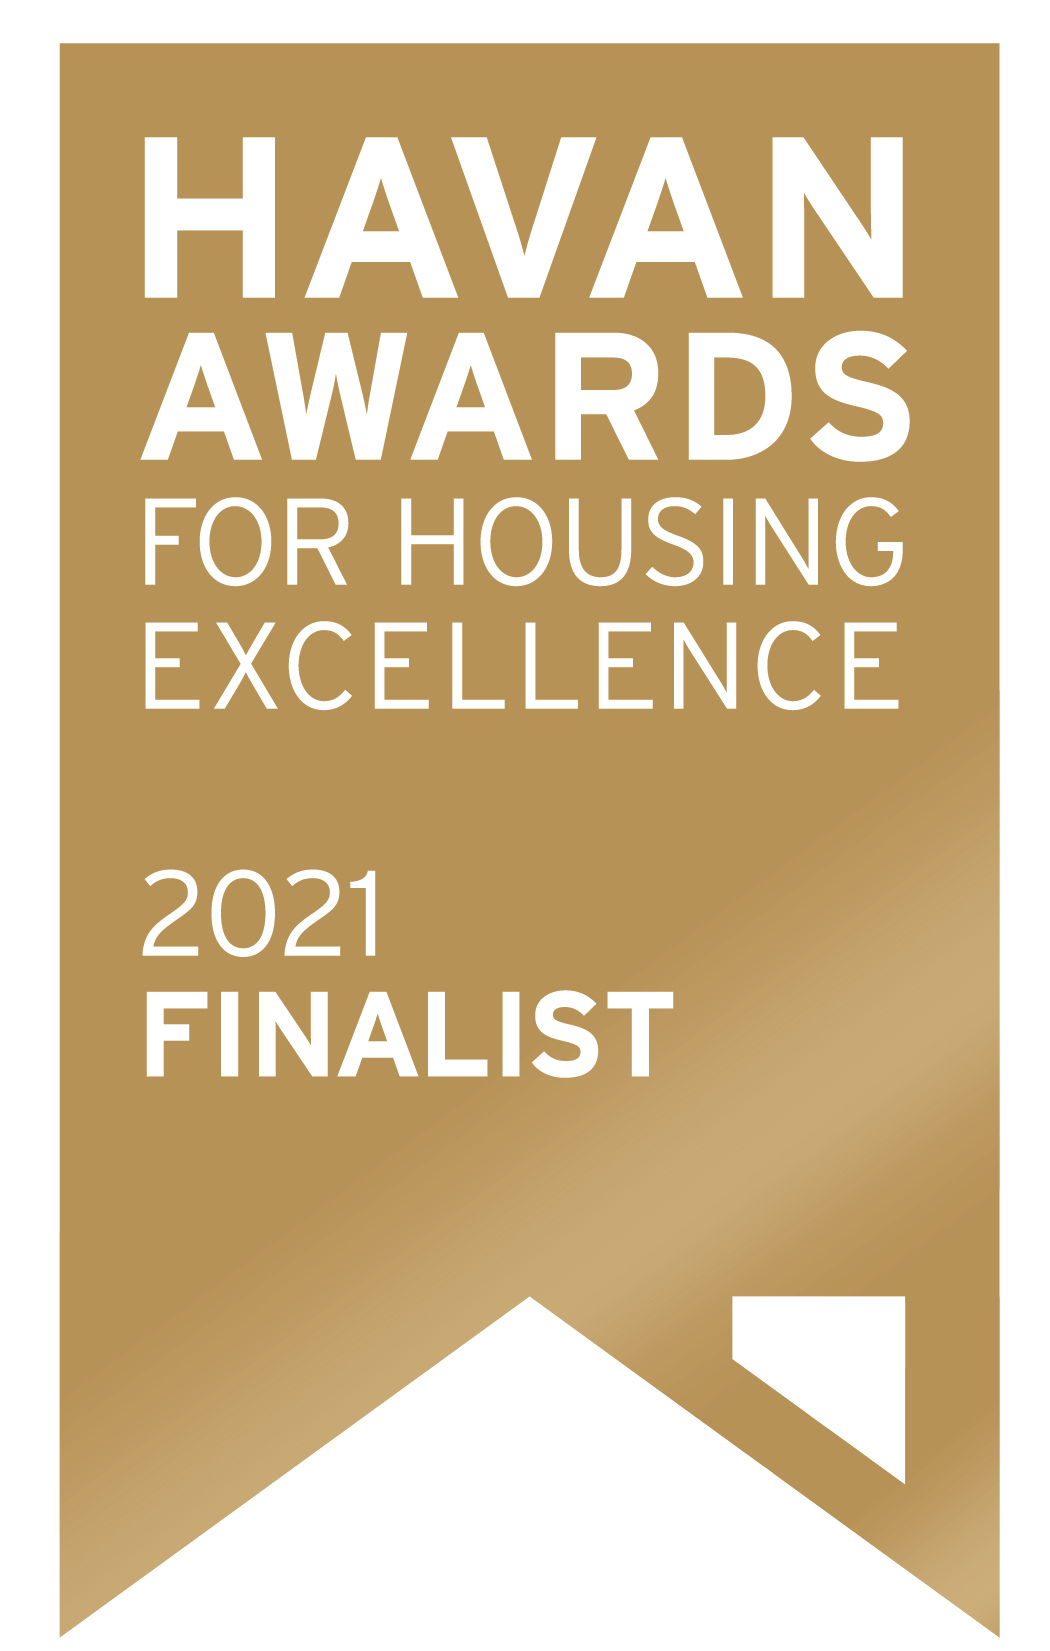 Havan Awards for Housing Excellence 2021 Finalist - Craine Projects